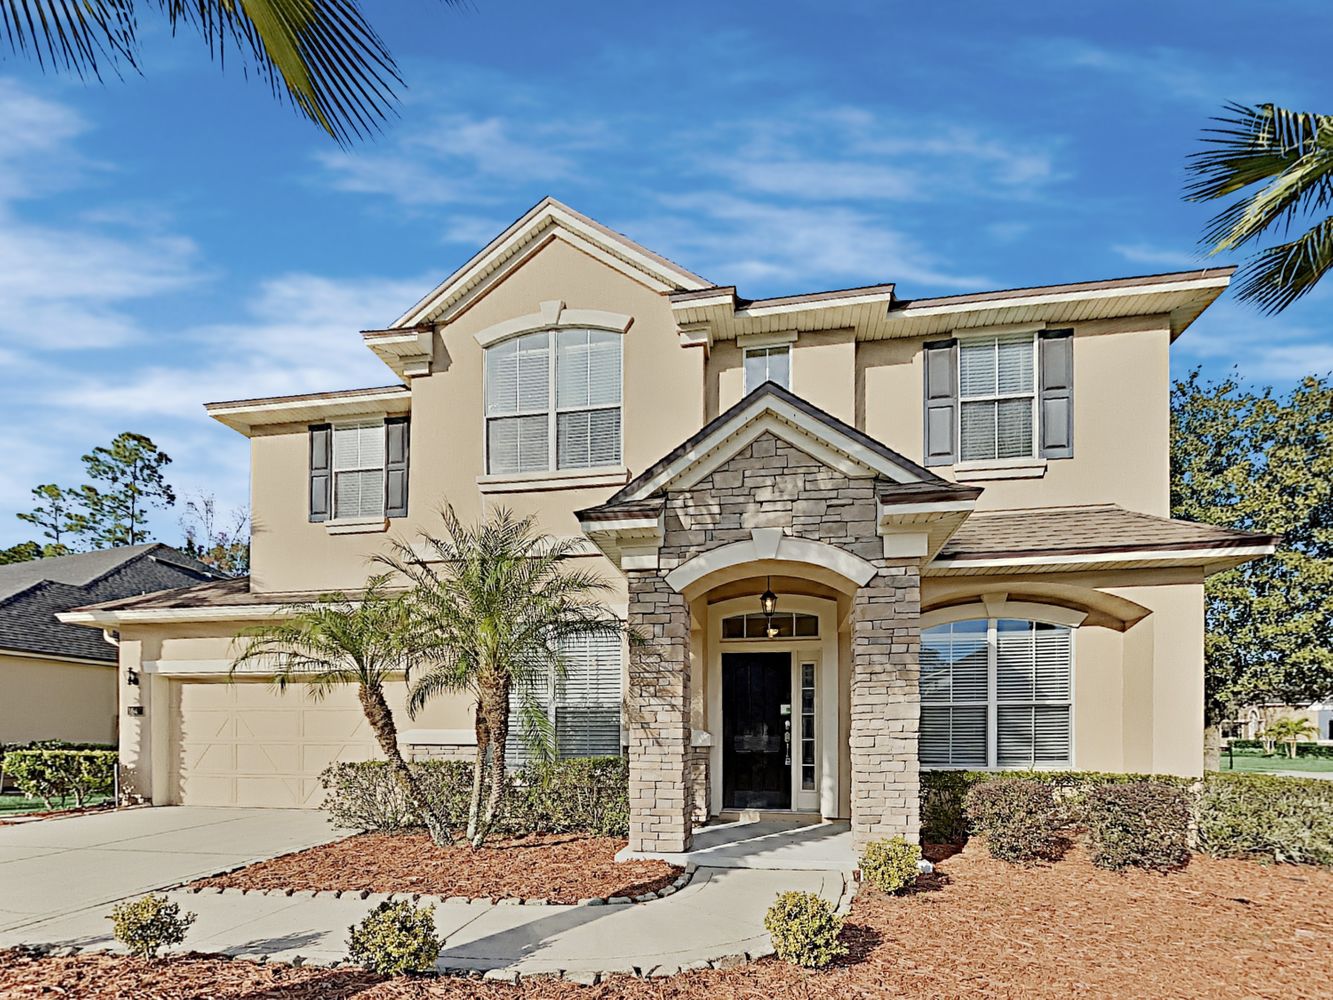 Gorgeous multi-level home with a garage at Invitation Homes Jacksonville.